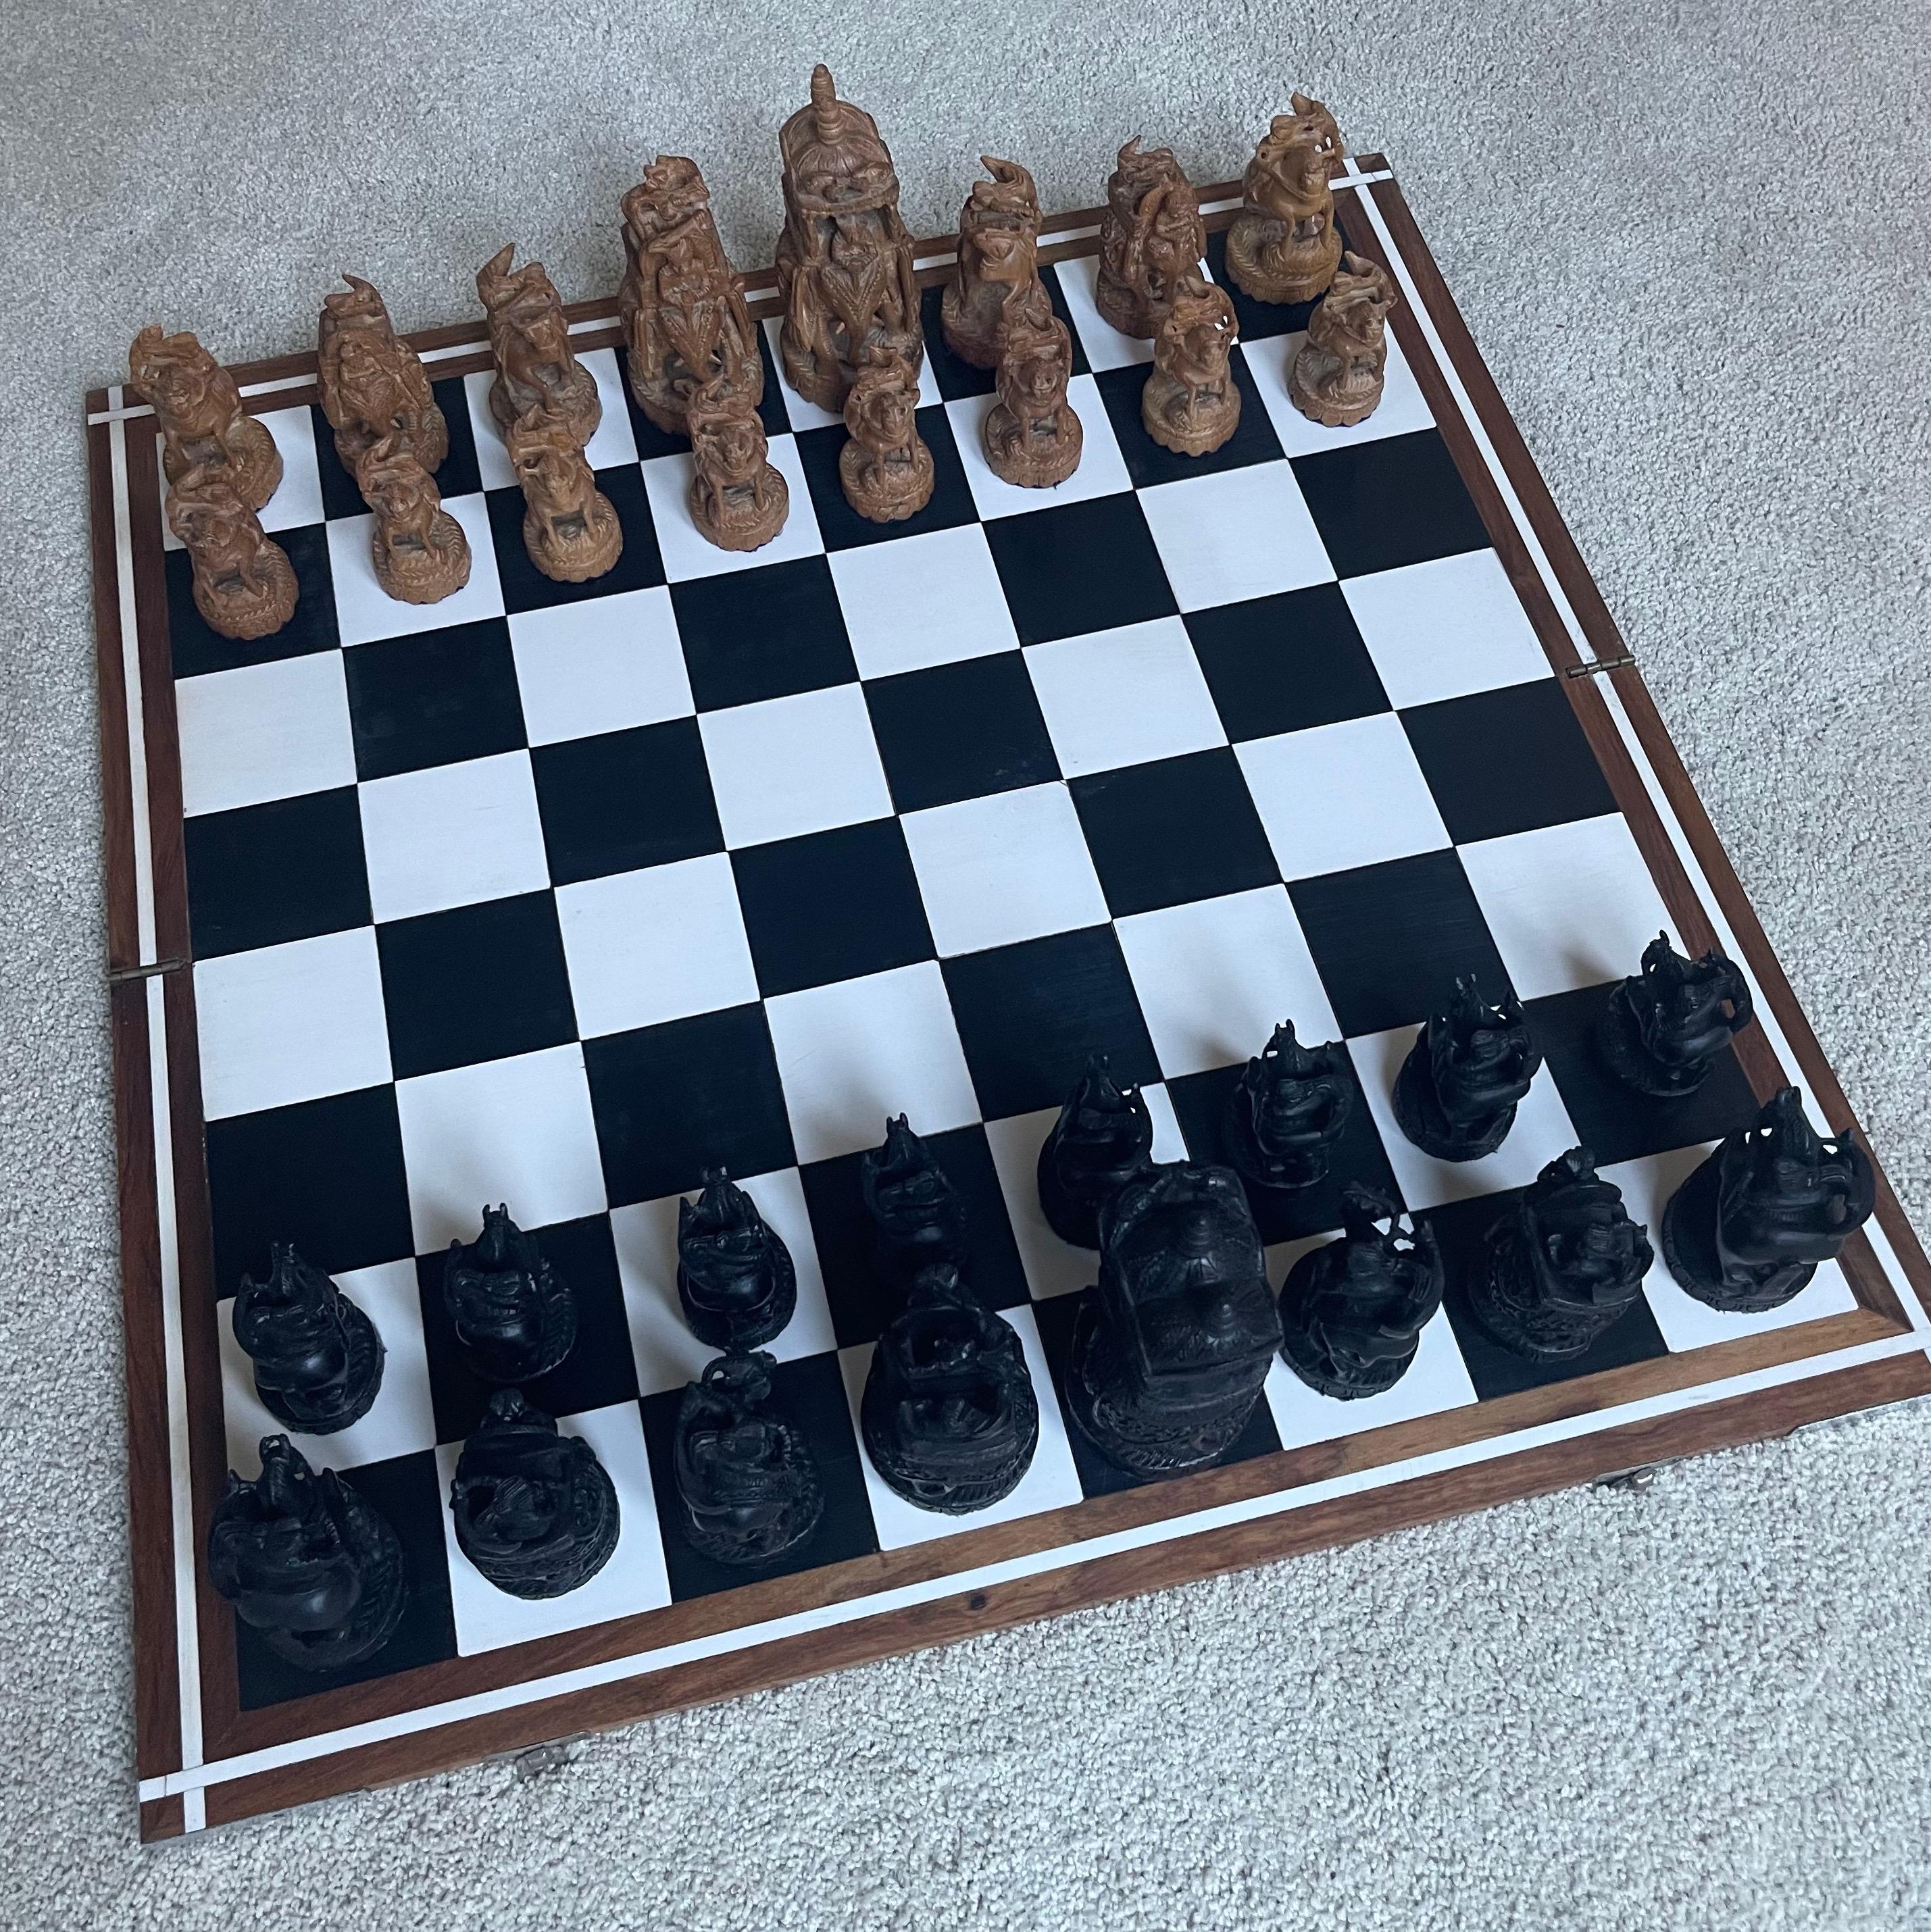 Large Vintage Rajasthani / Indian Chess Set with Board For Sale 12